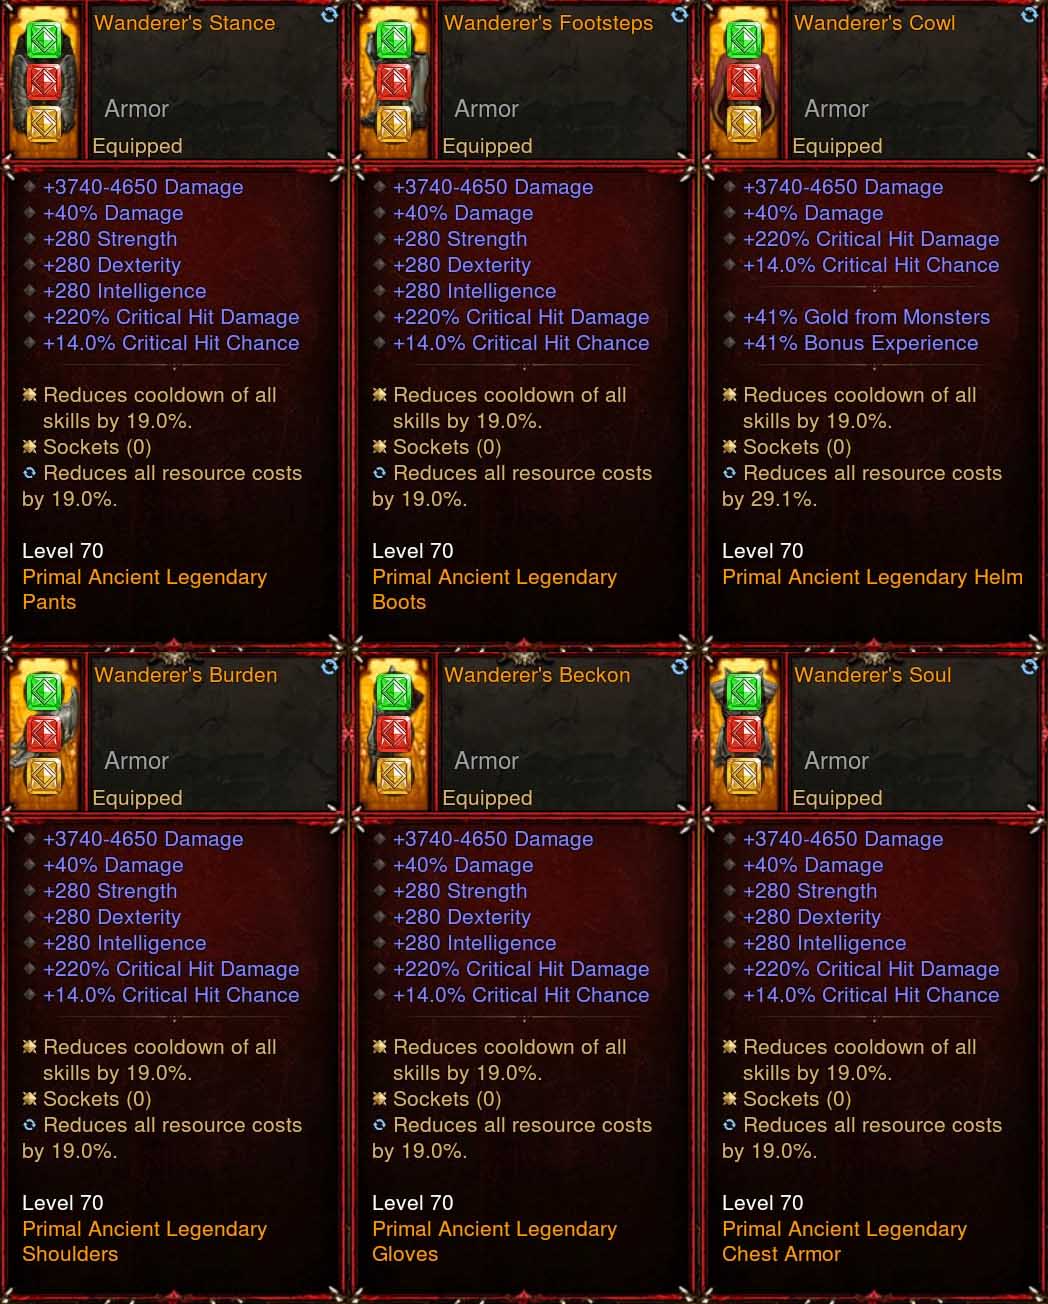 [Primal Ancient] 2.7.1 (Promo 8) Modded Dark Wanderer Set Diablo 3 Mods ROS Seasonal and Non Seasonal Save Mod - Modded Items and Gear - Hacks - Cheats - Trainers for Playstation 4 - Playstation 5 - Nintendo Switch - Xbox One